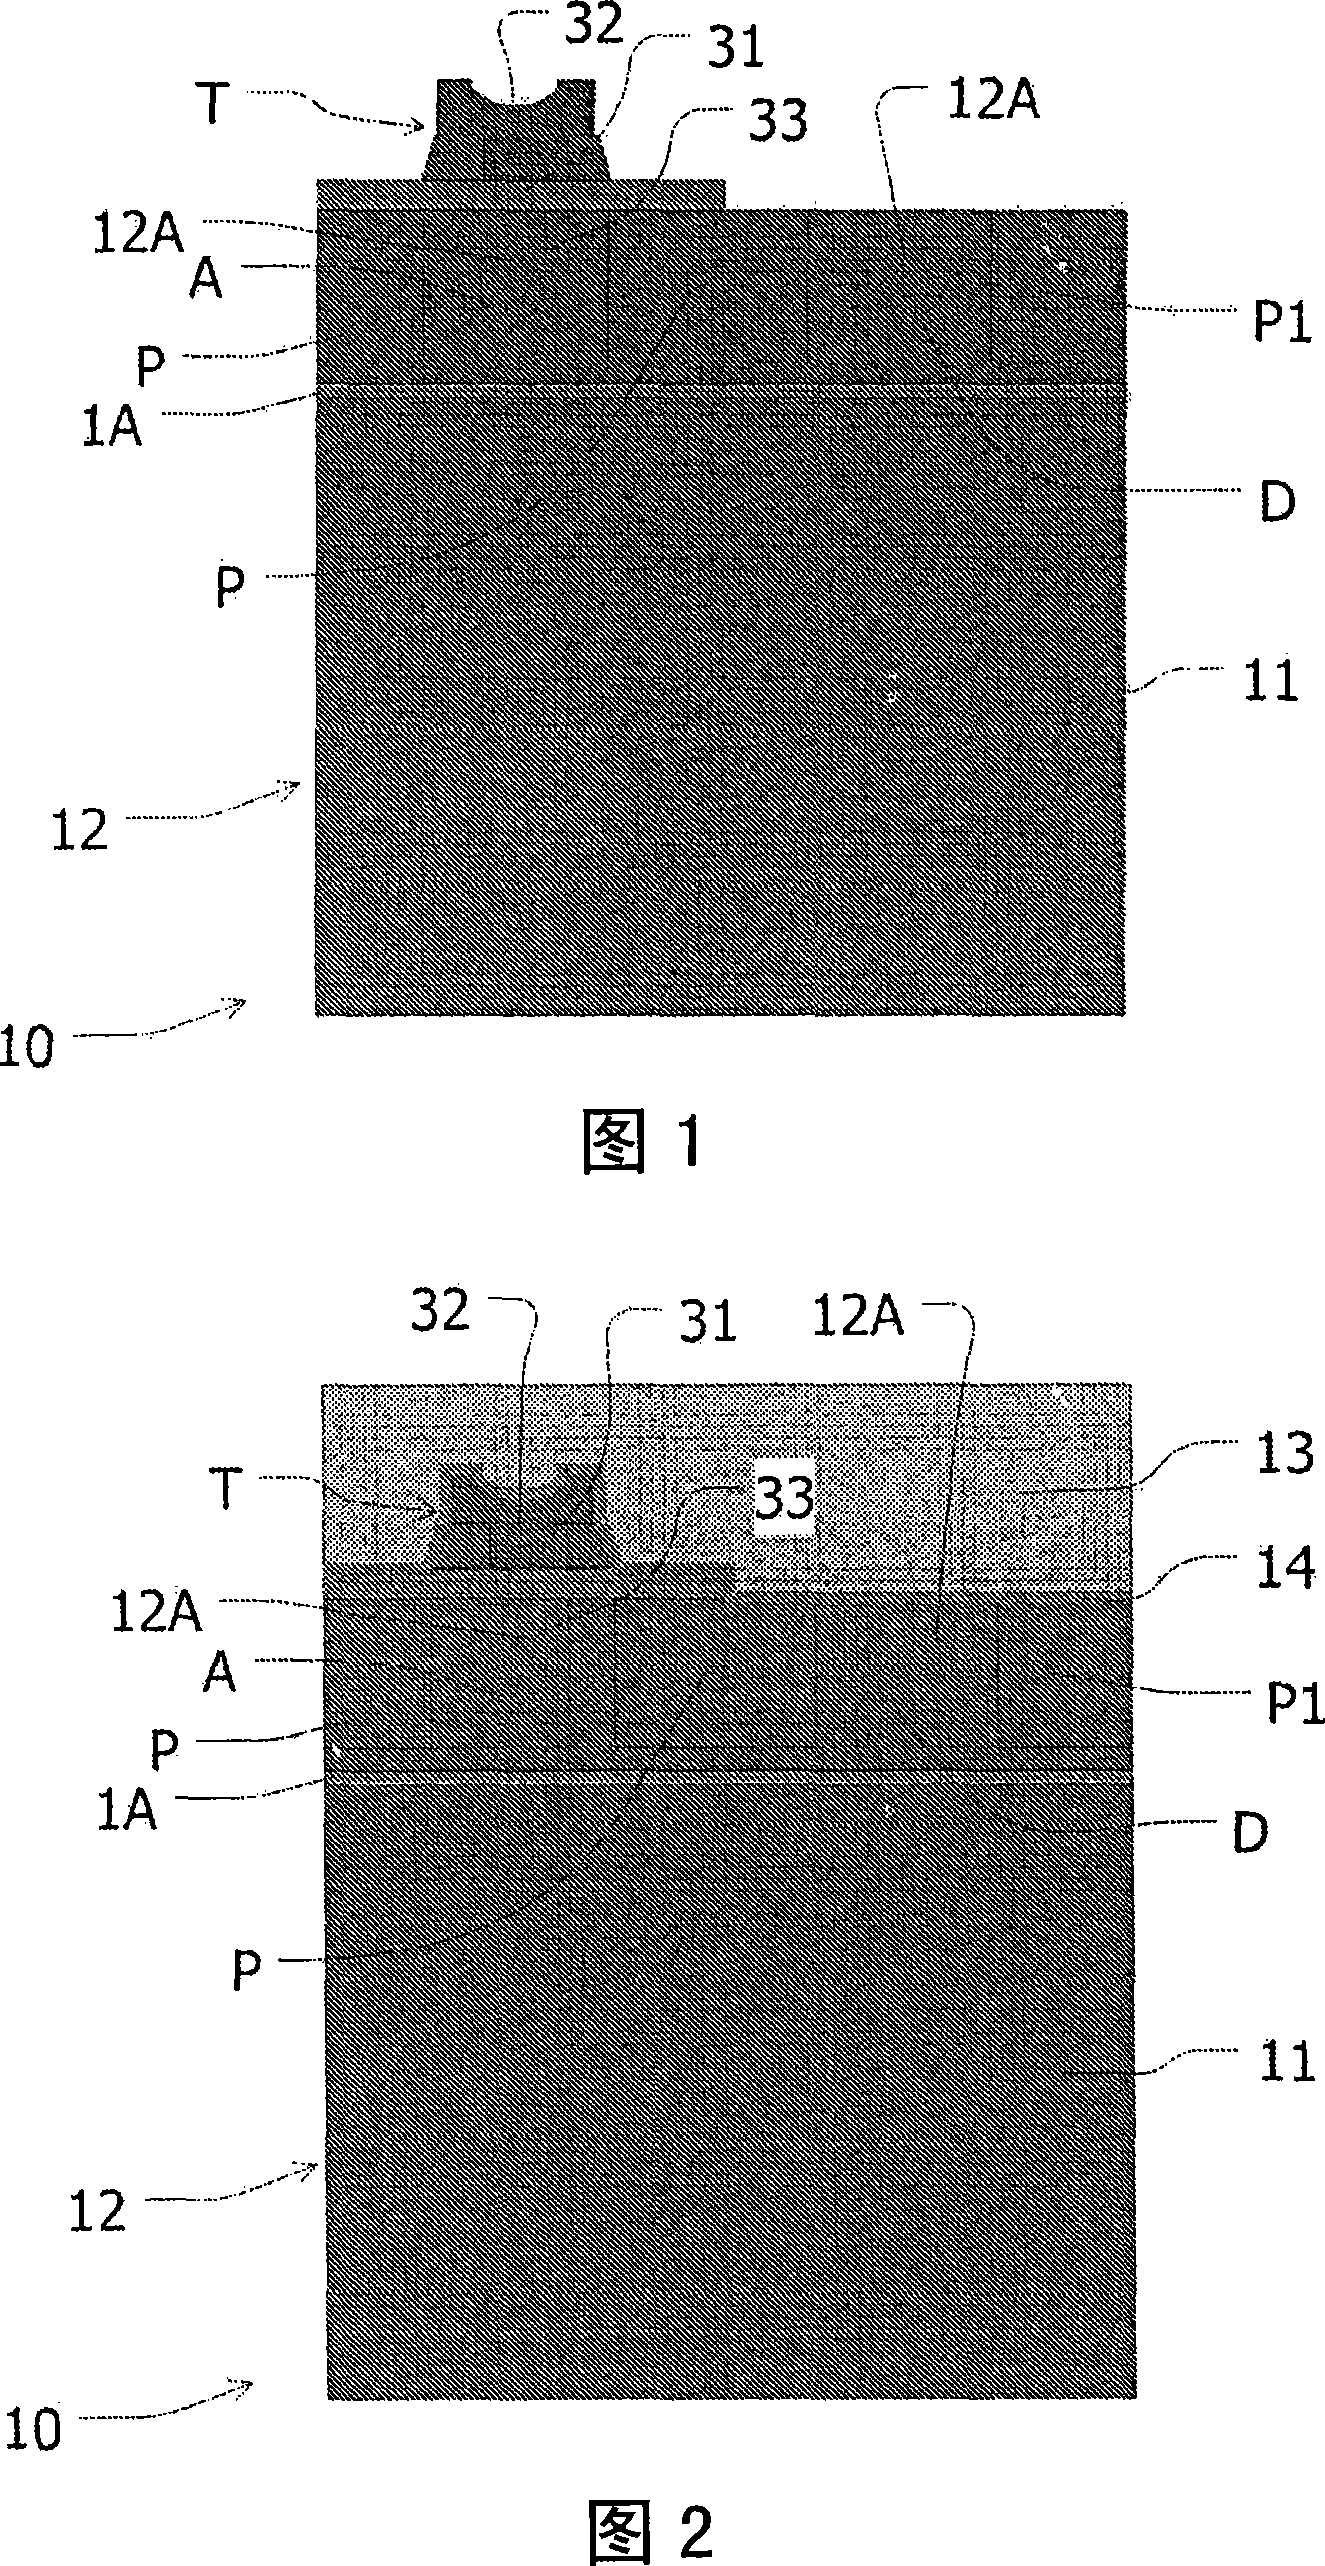 Semiconductor device and method of manufacturing such a device